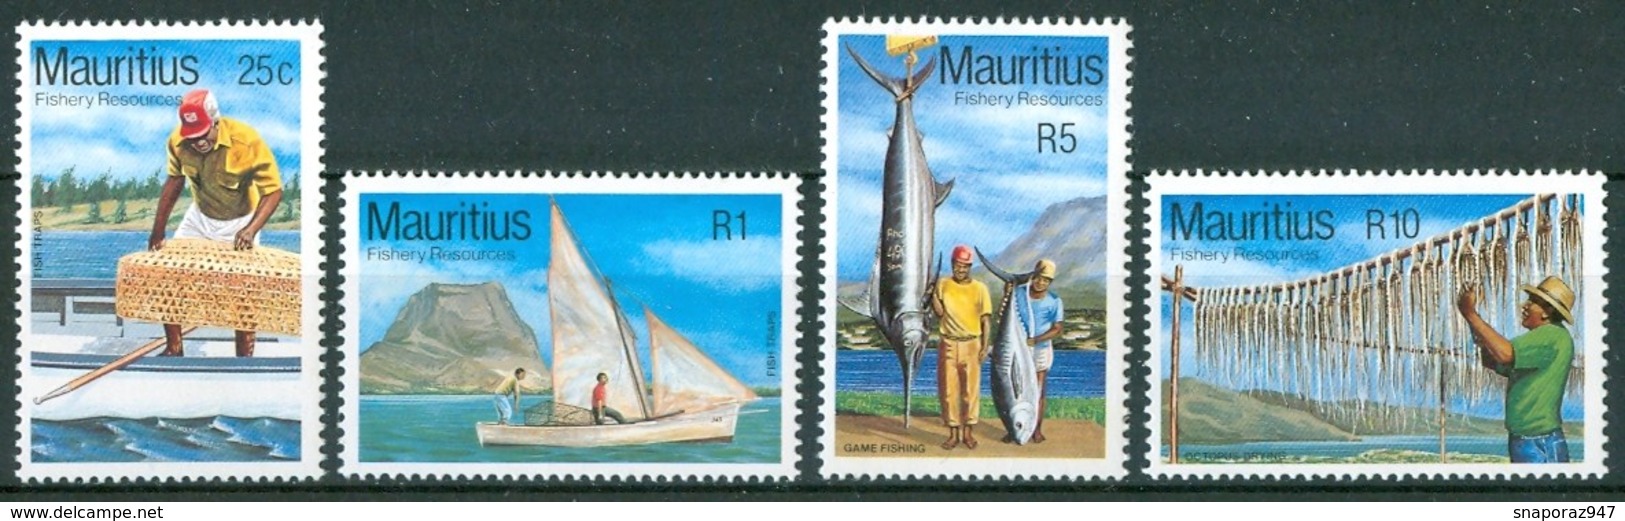 1984 Mauritius Fishery Resources Infrastrutture Infrastructure Set MNH** Ab52 - Fabbriche E Imprese